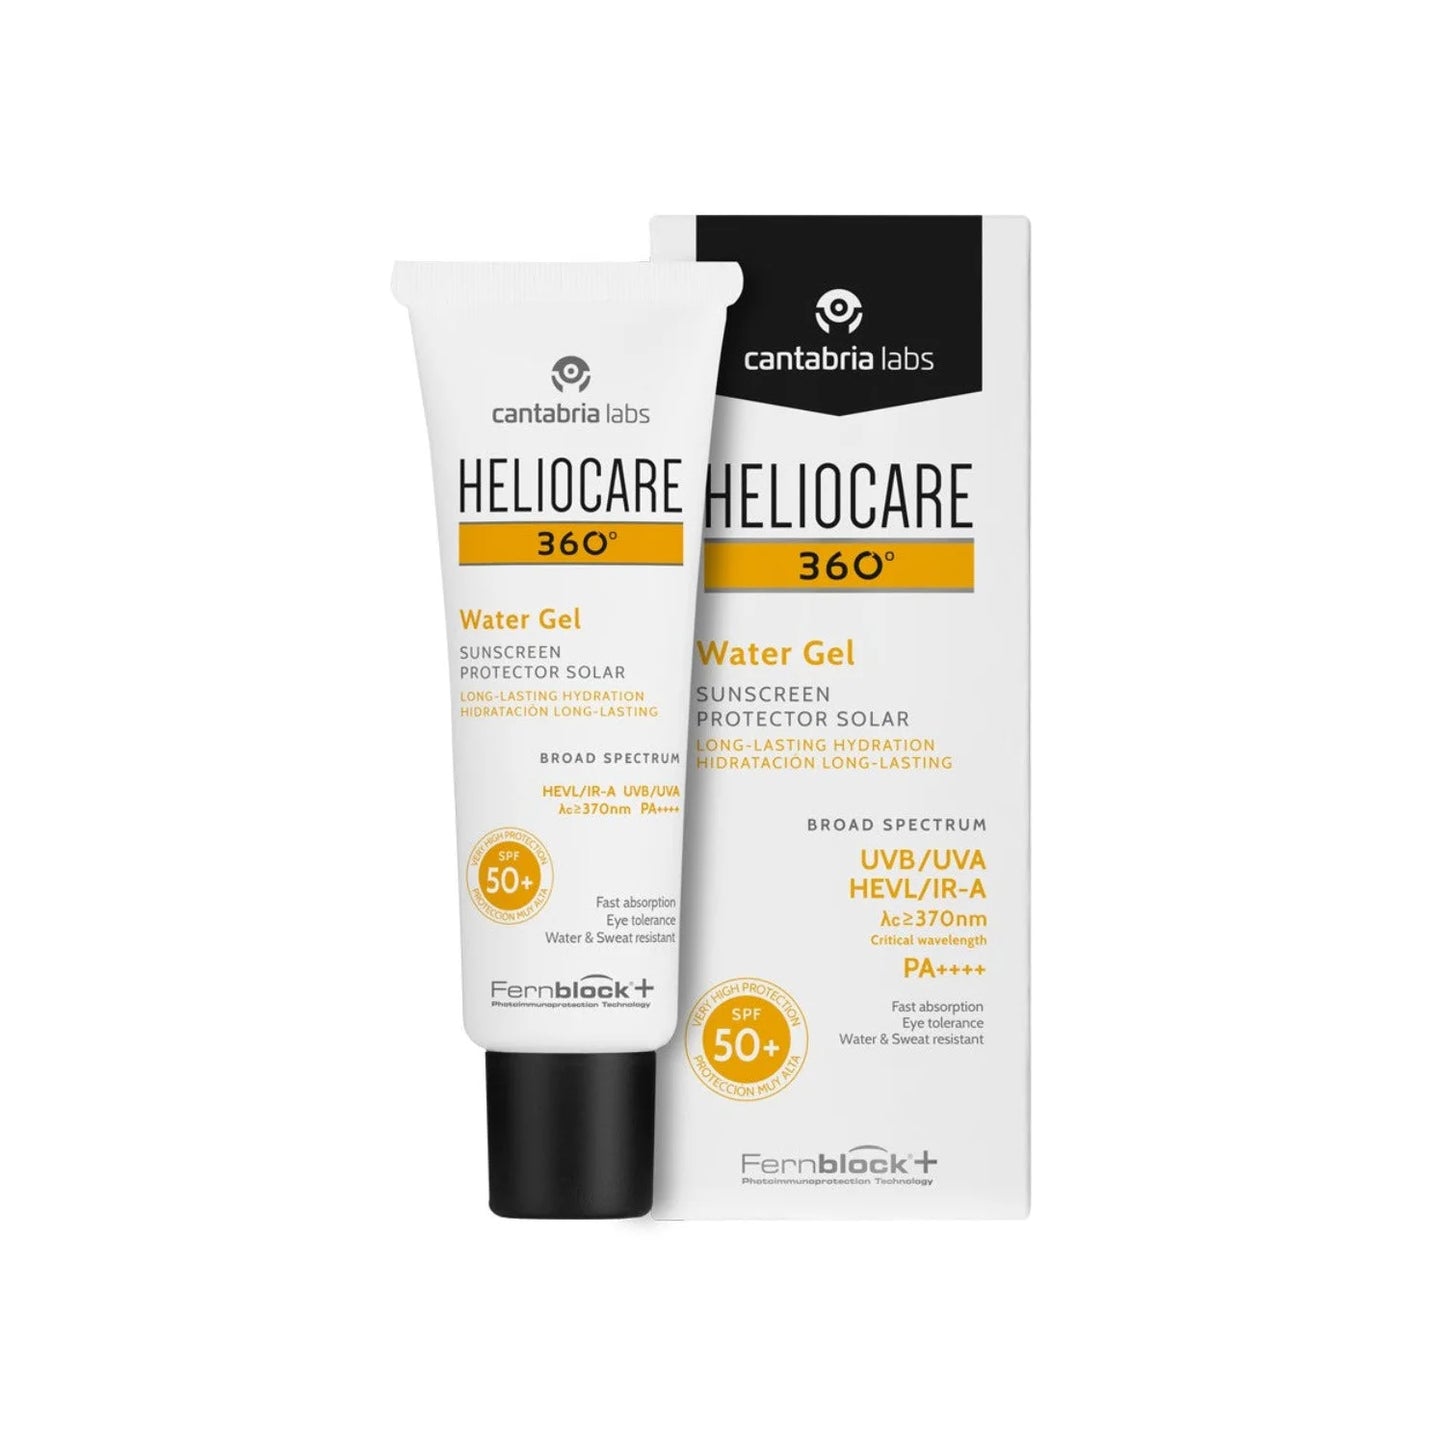 CANTABRIA HELIOCARE 360 water gel spf 50+ 50ml